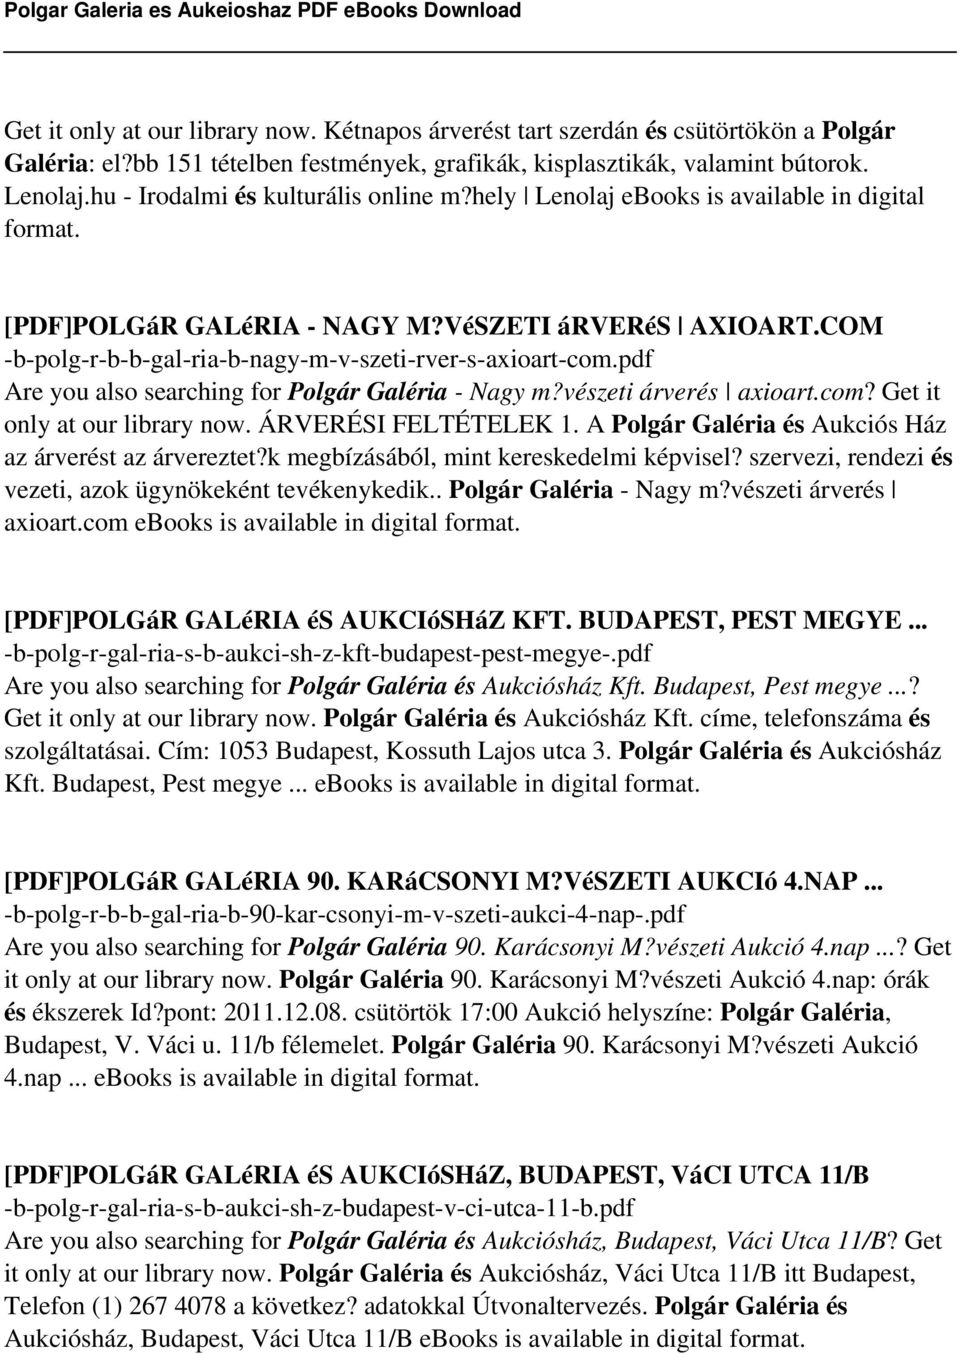 COM -b-polg-r-b-b-gal-ria-b-nagy-m-v-szeti-rver-s-axioart-com.pdf Are you also searching for Polgár Galéria - Nagy m?vészeti árverés axioart.com? Get it only at our library now. ÁRVERÉSI FELTÉTELEK 1.